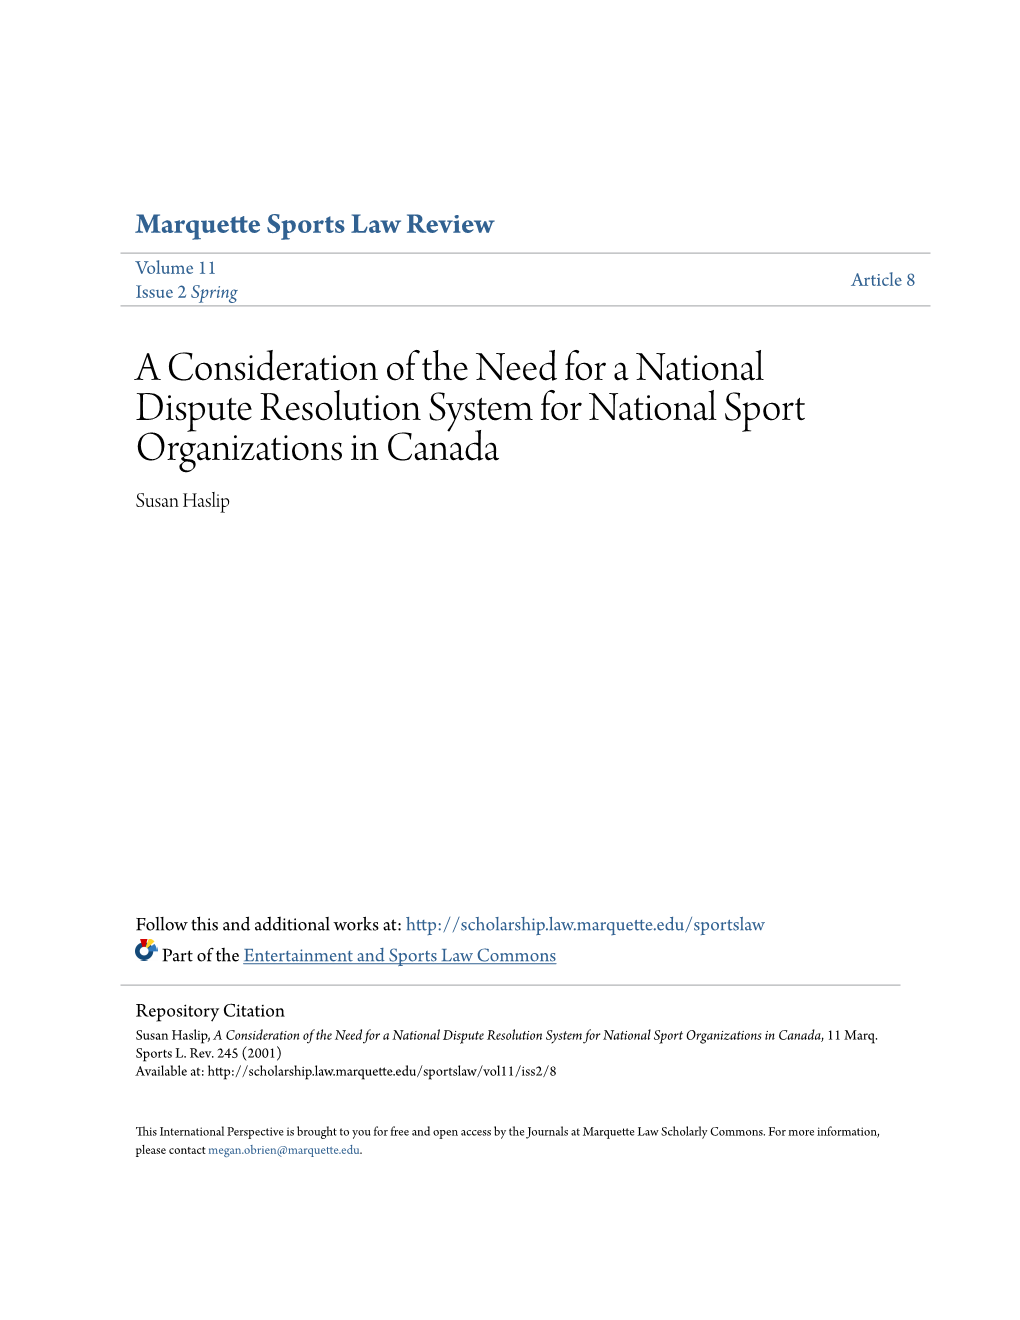 A Consideration of the Need for a National Dispute Resolution System for National Sport Organizations in Canada Susan Haslip